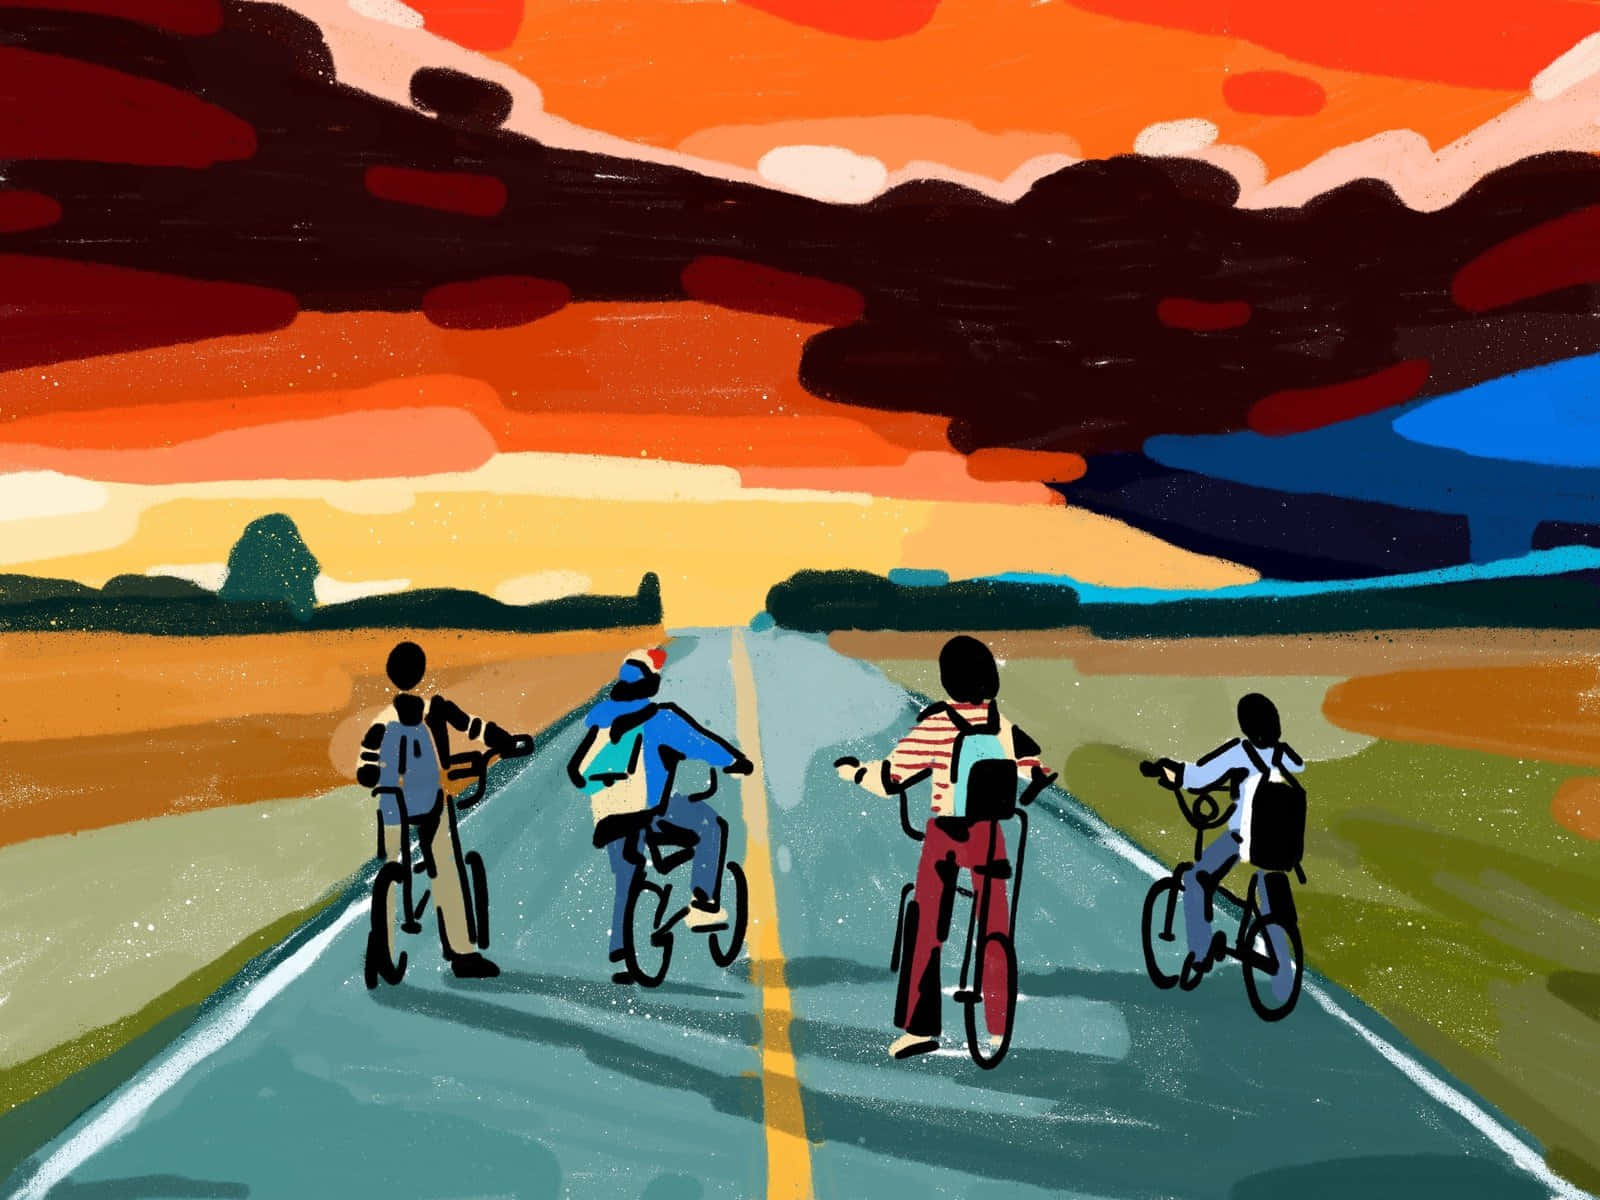 - Make journeys more exciting with the Stranger Things Bike Wallpaper